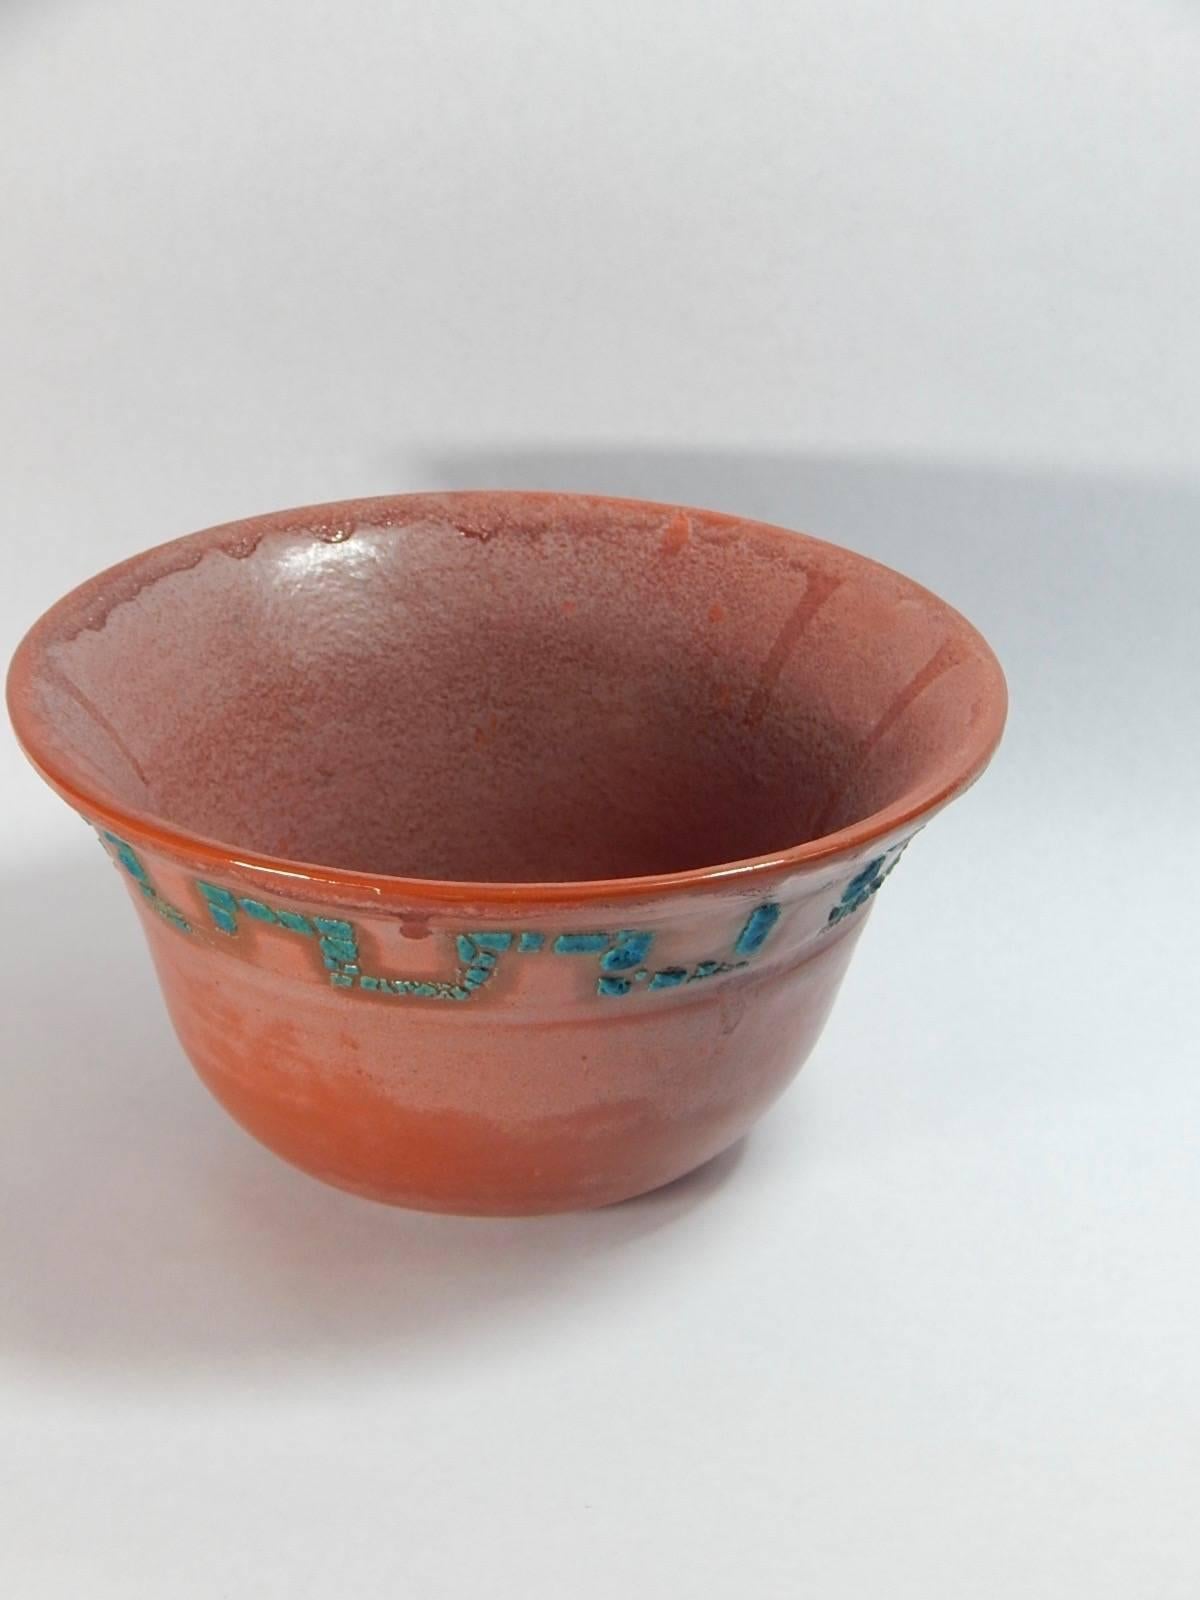  Relicware wheel thrown earthenware bowl by Andrew Wilder # 67. In terra cotta with turquoise lichen glaze and terra cotta colored overglaze . Made by hand in Los Angeles, California 2017.  We can produce commissions to order in this series. Contact